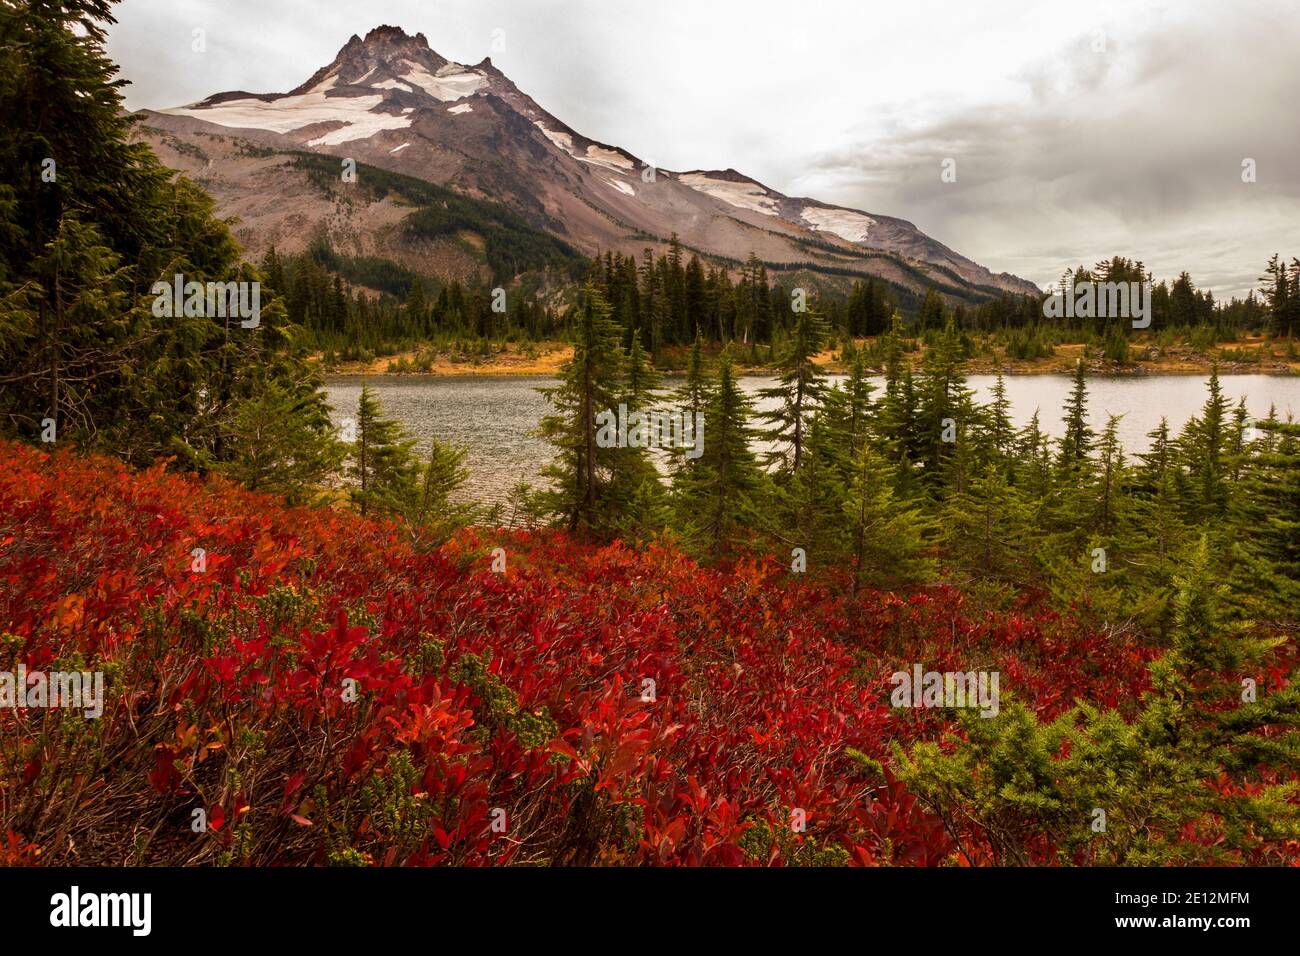 The brilliant red of autum huckleberries contrast with the evergreens in the foreground in this photo of Oregon's Russell Lake and Mt Jefferson. Stock Photo